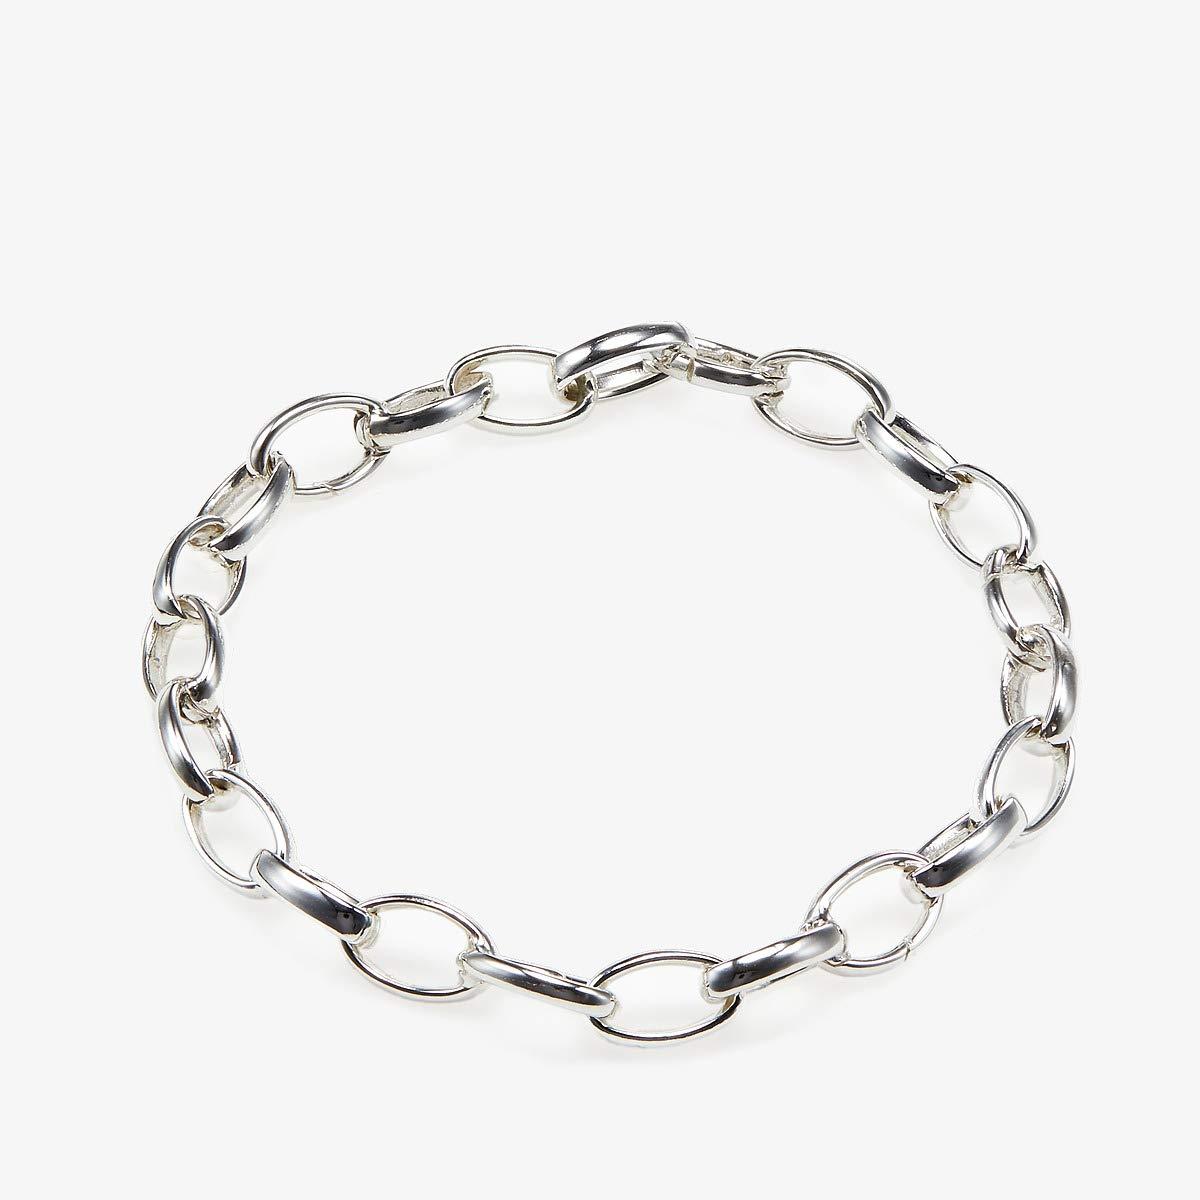 Gucci Gg Link Charm Bracelet in Silver (Metallic) - Save 7% - Lyst